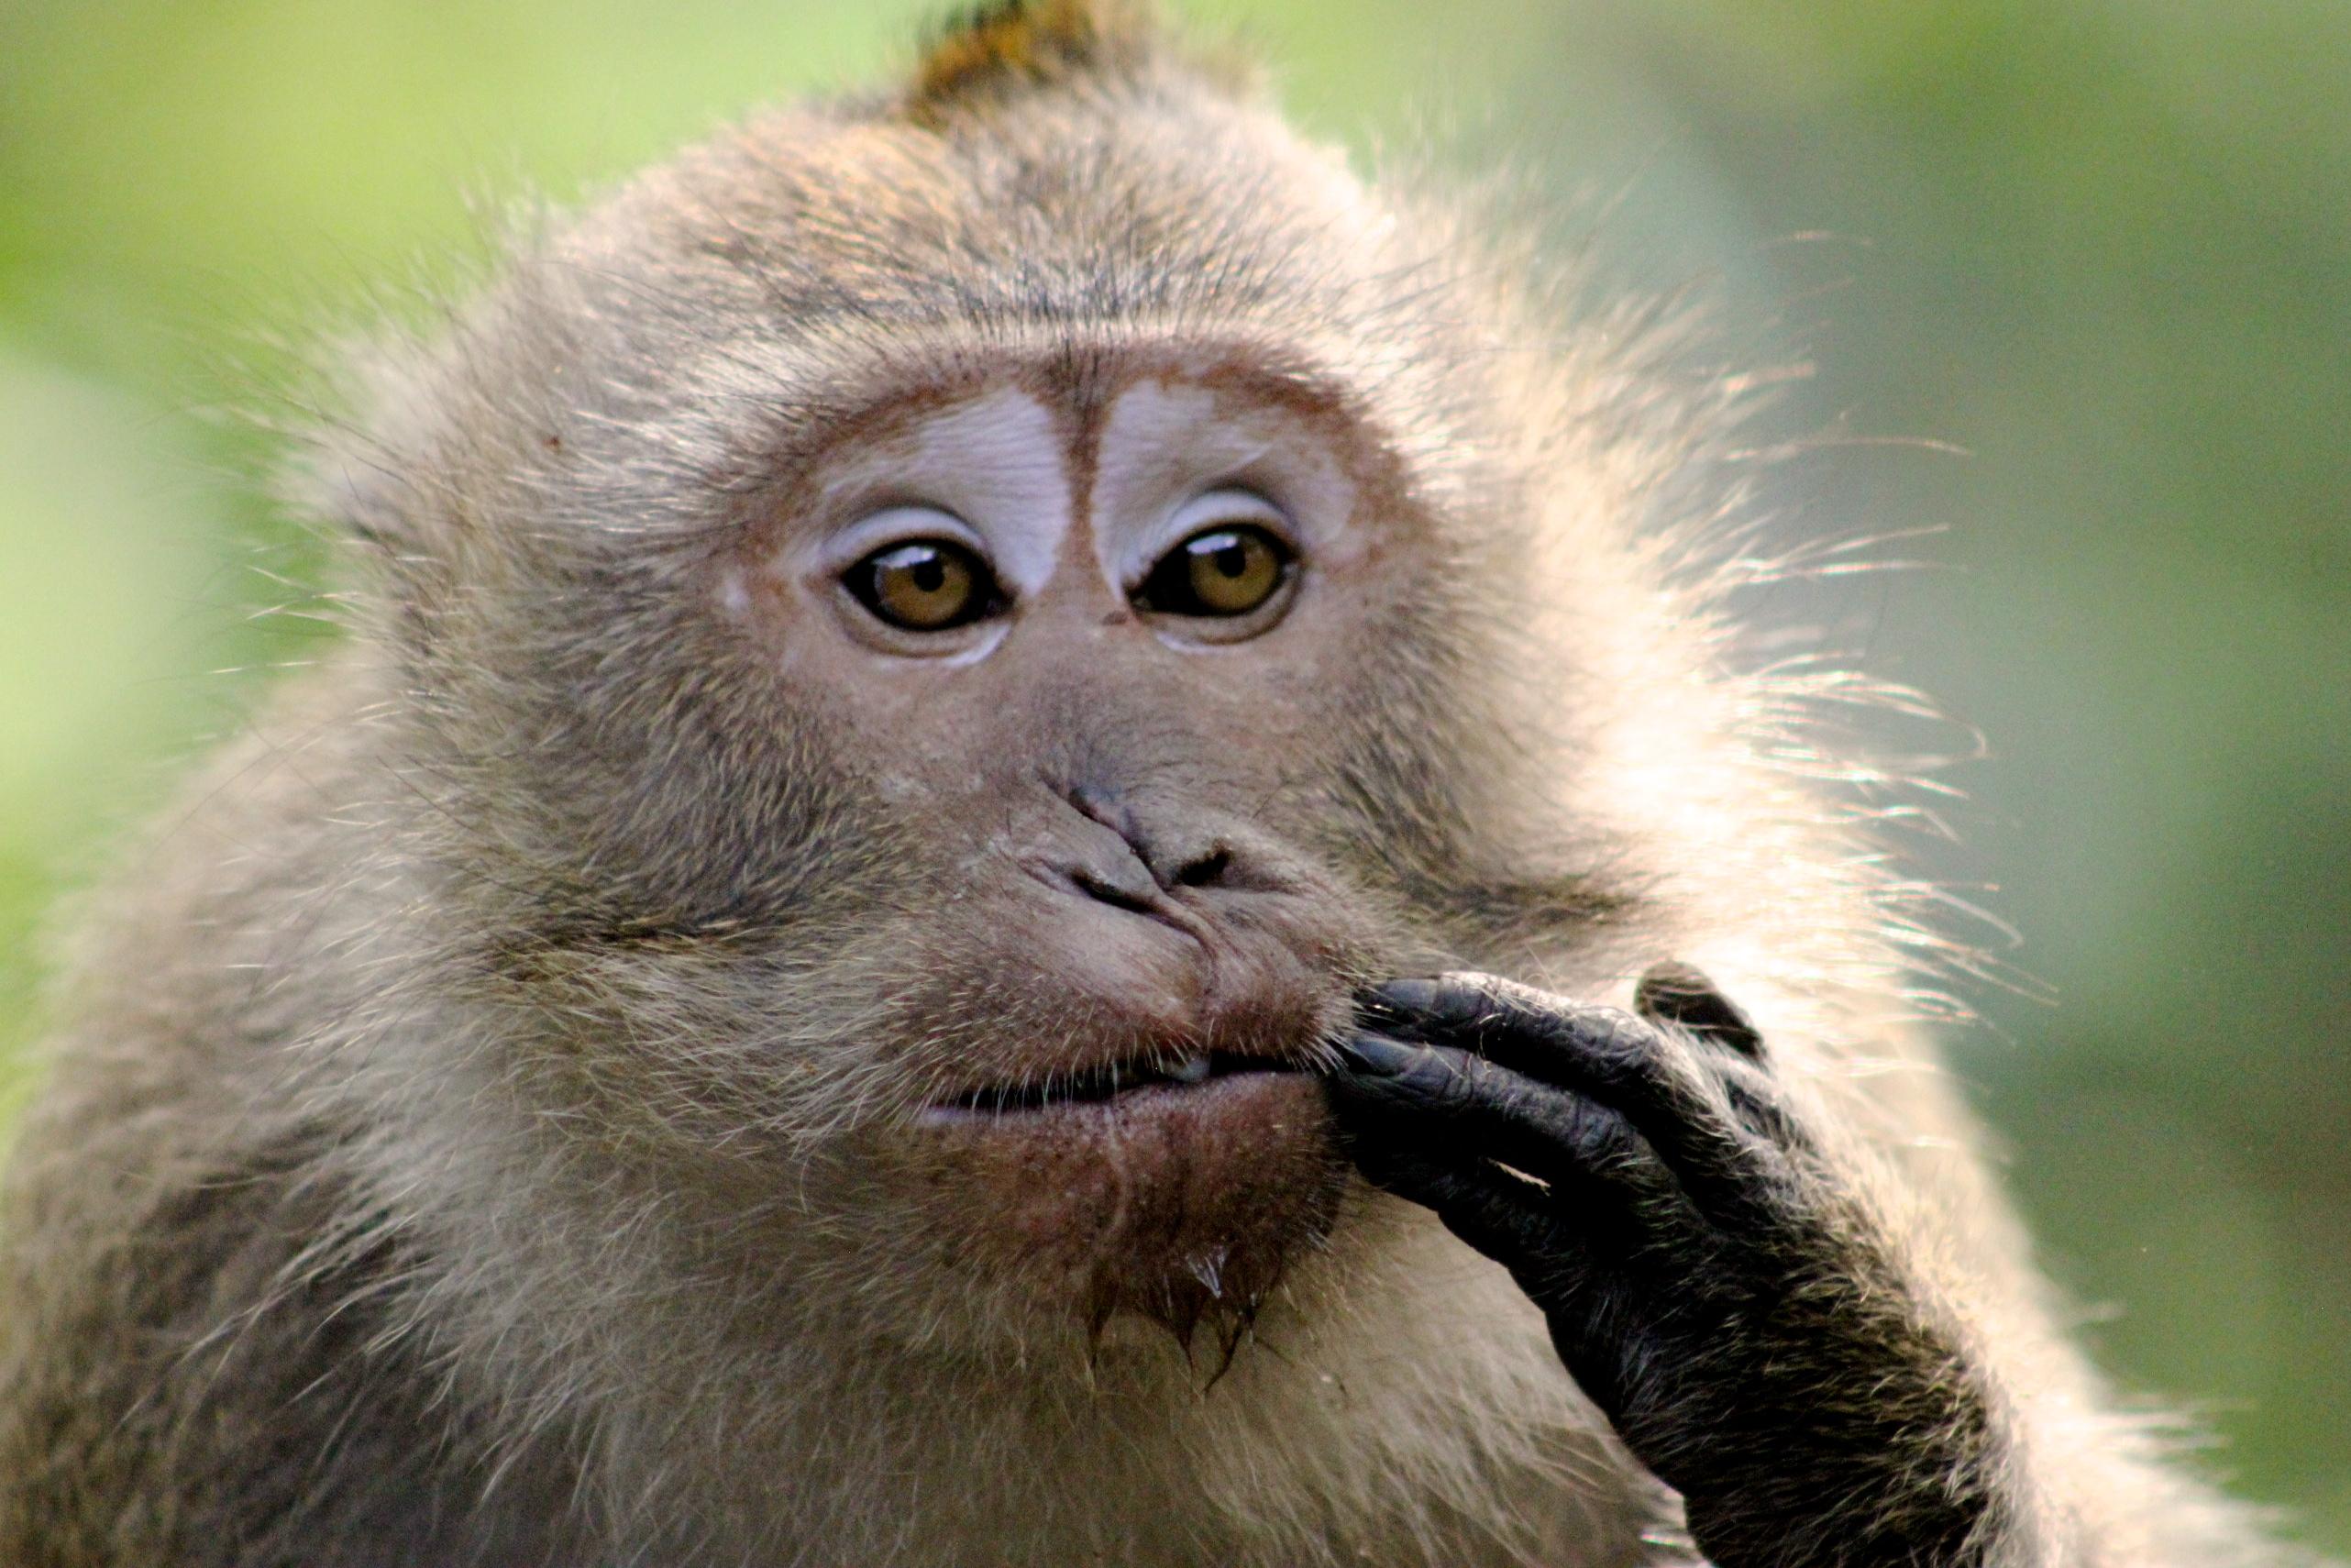 A cynomolgus macaque with a scar on it's nose. The scar on this monkey’s nose makes it distinctive and easily identifiable by eye